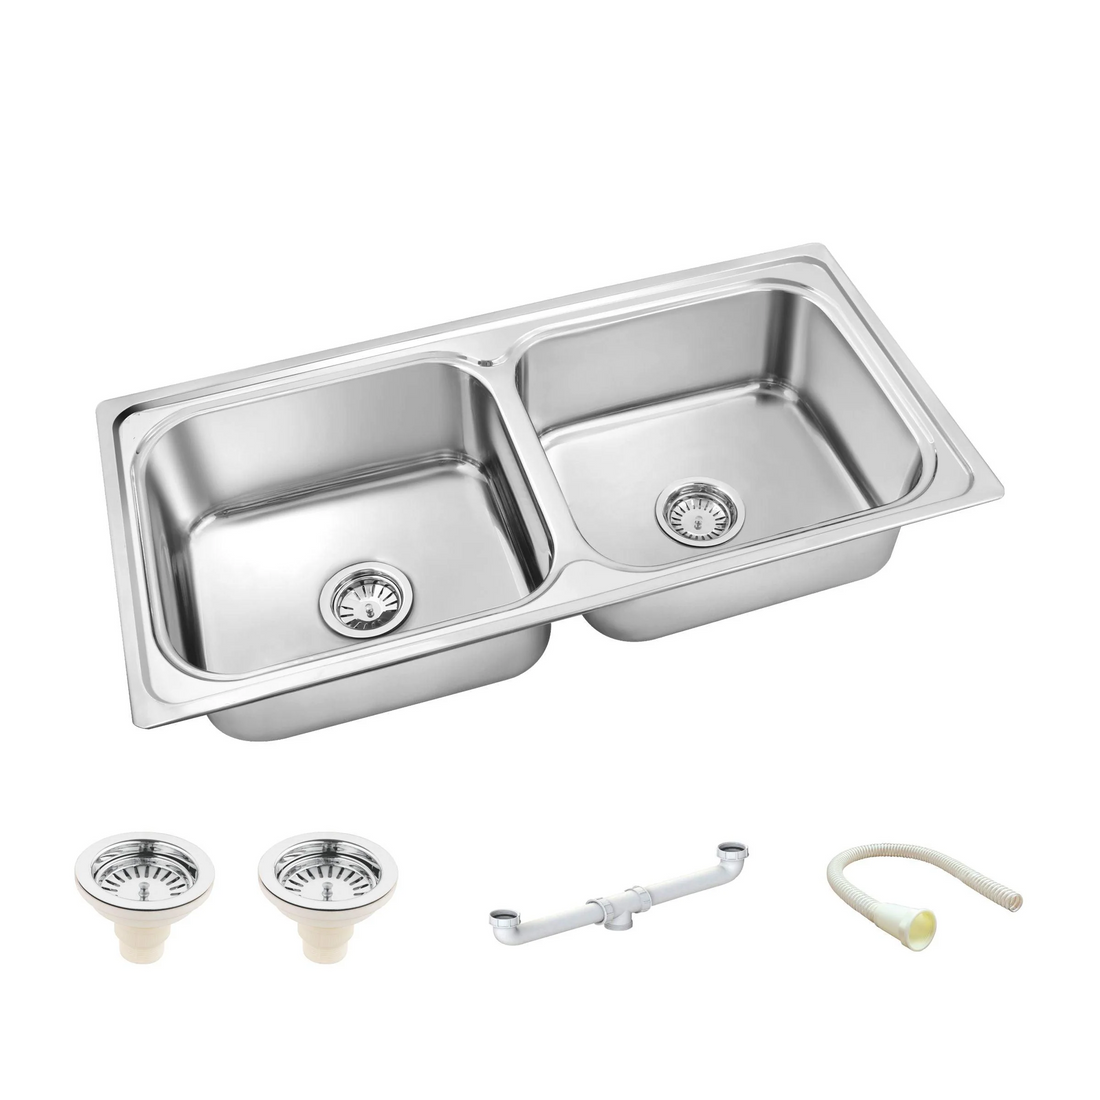 Square Double Bowl 304-Grade Kitchen Sink (45 x 20 x 9 Inches)